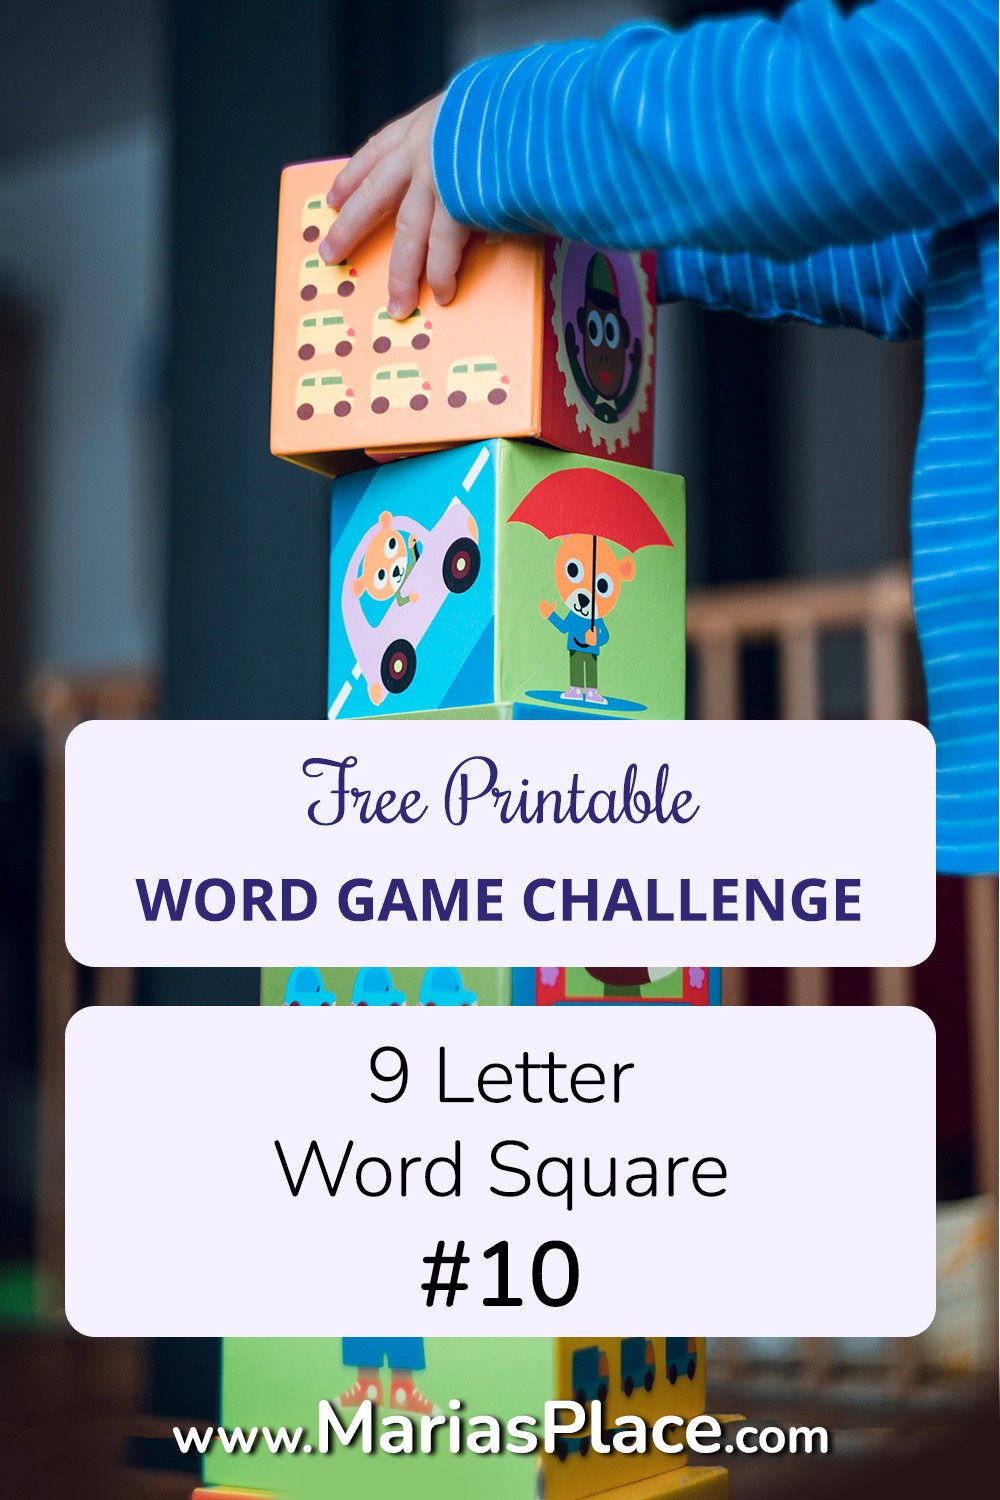 9 letter word square